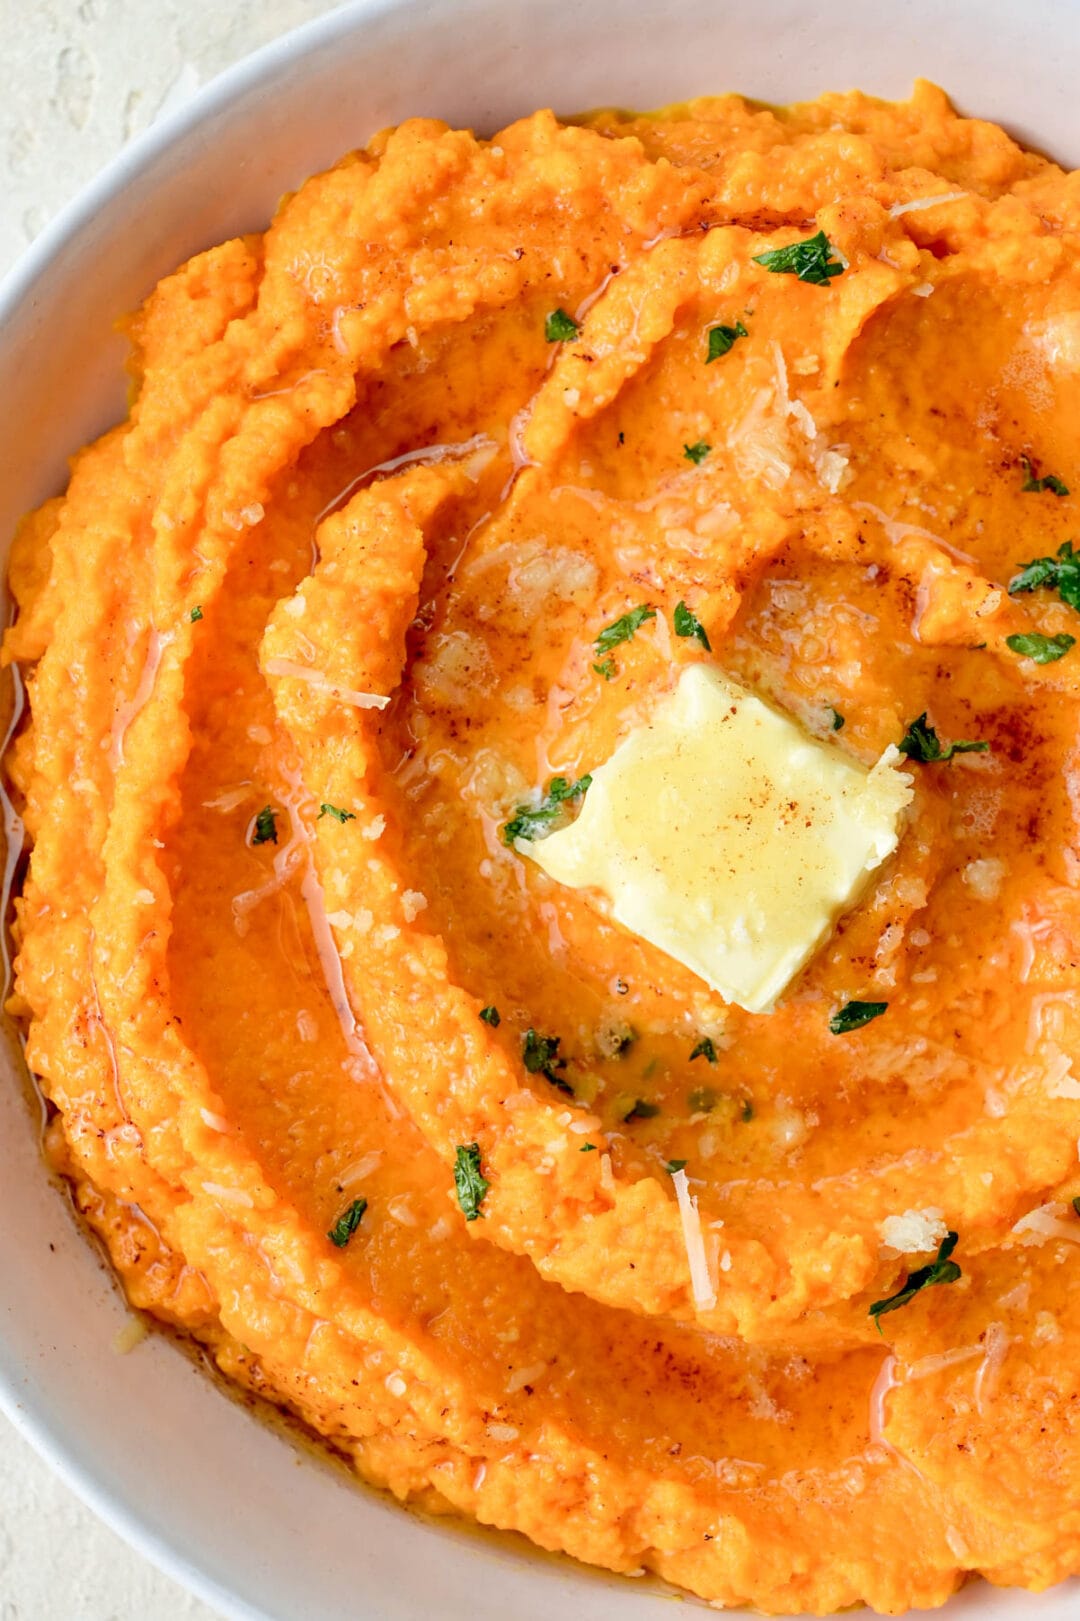 Mashed Carrots - Everyday Delicious